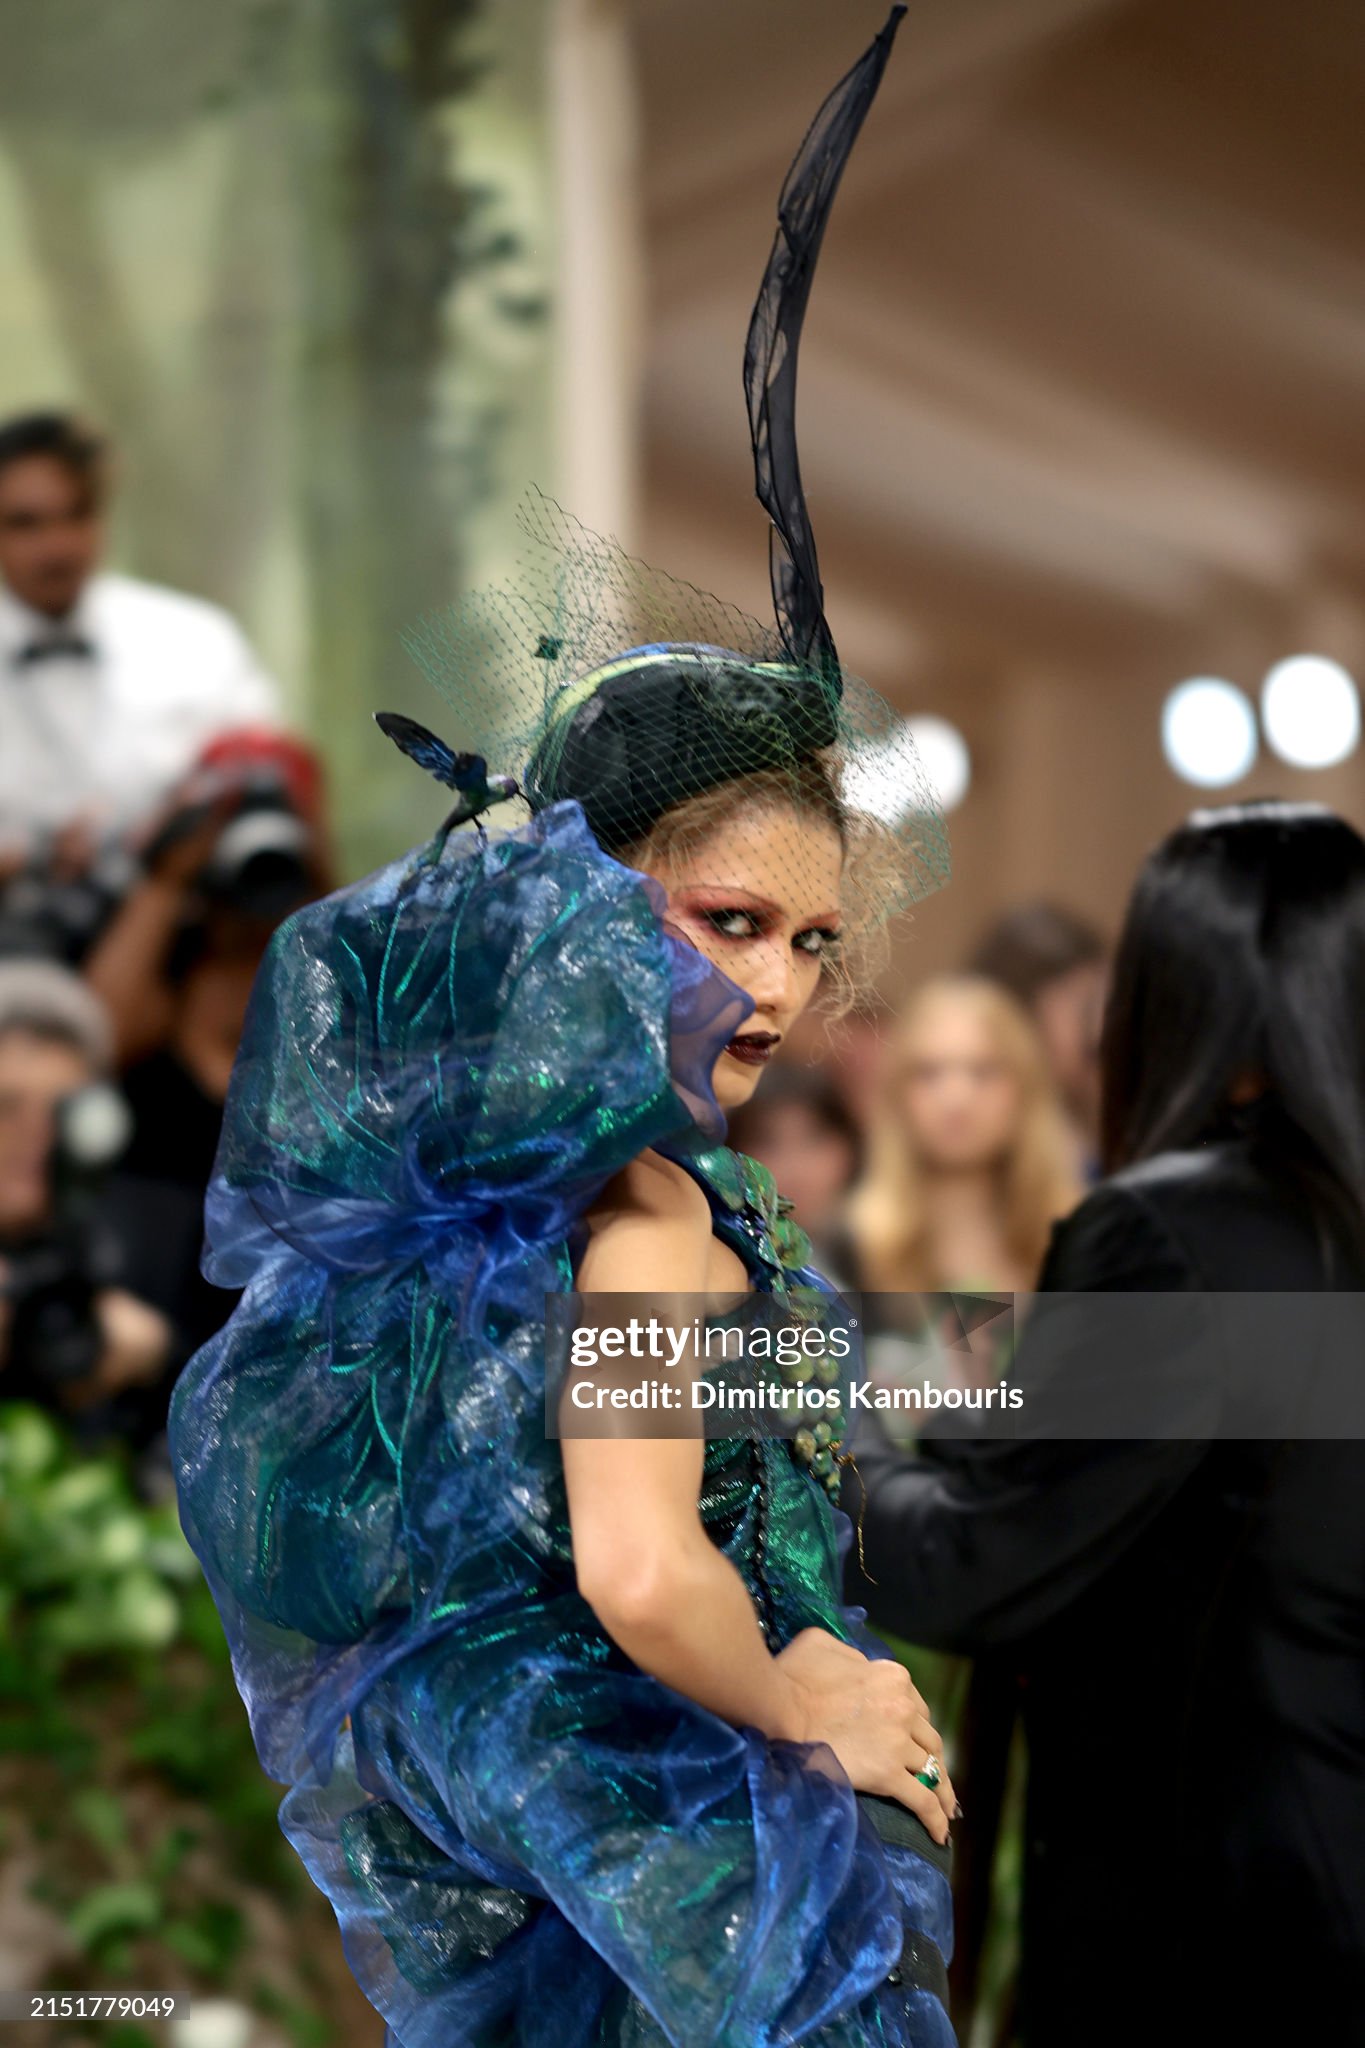 gettyimages-2151779049-2048x2048.jpg